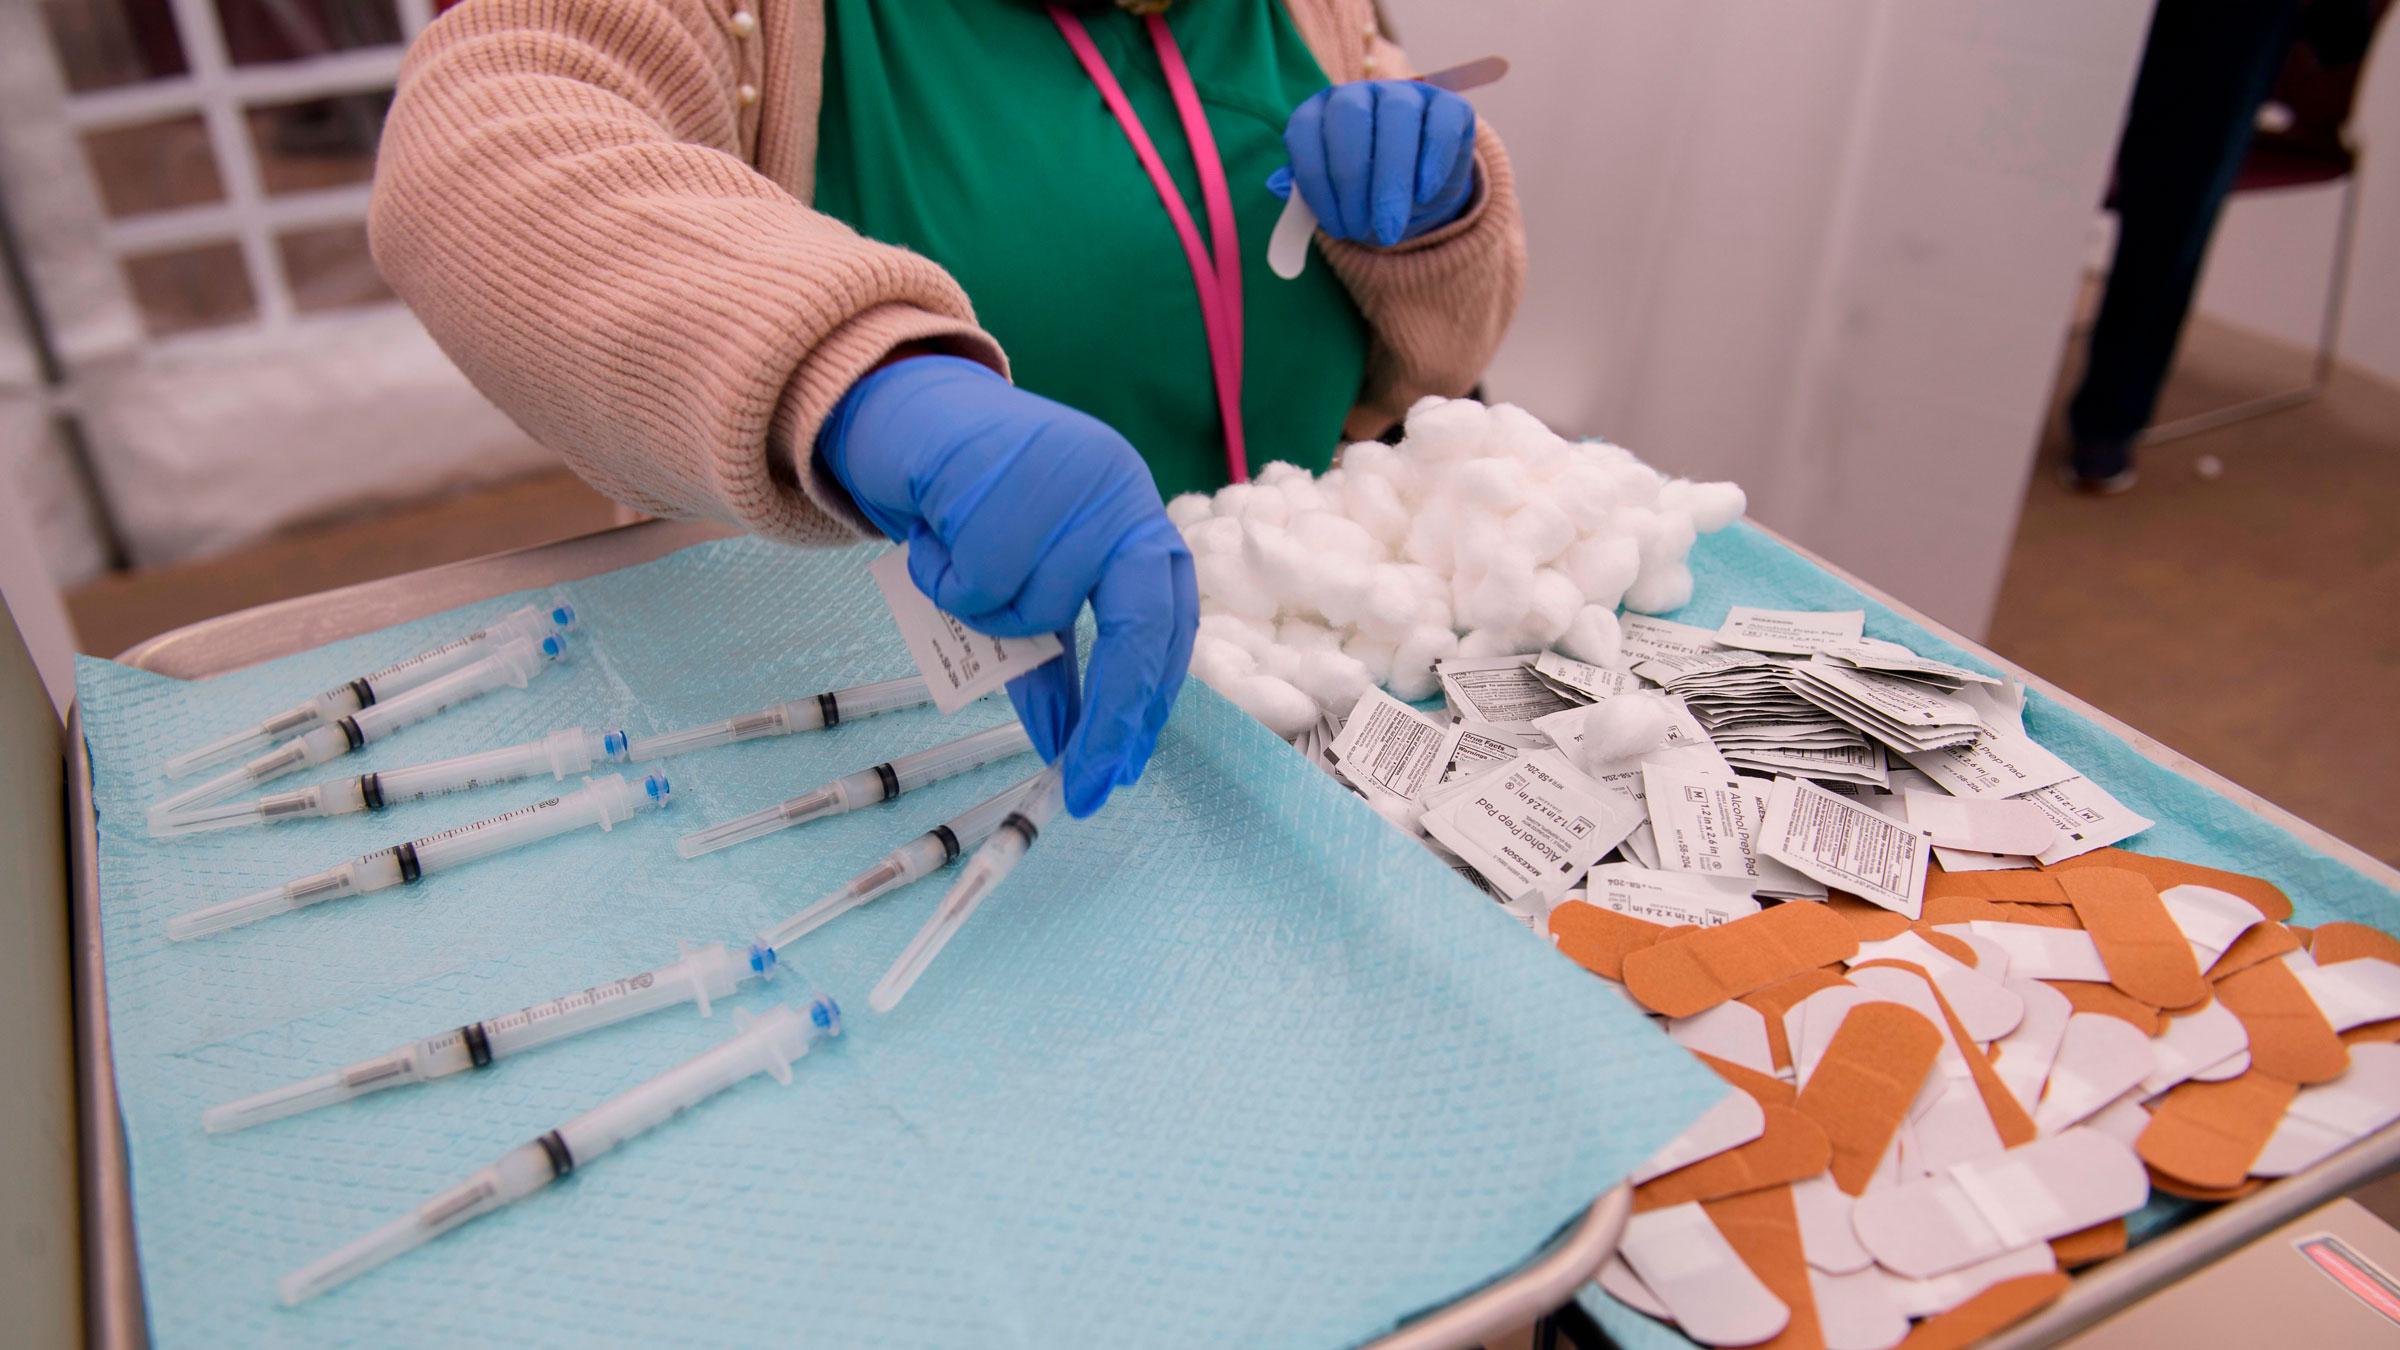 Syringes filled with the Covid-19 vaccine wait to be administered at a community health center in Los Angeles on Monday.